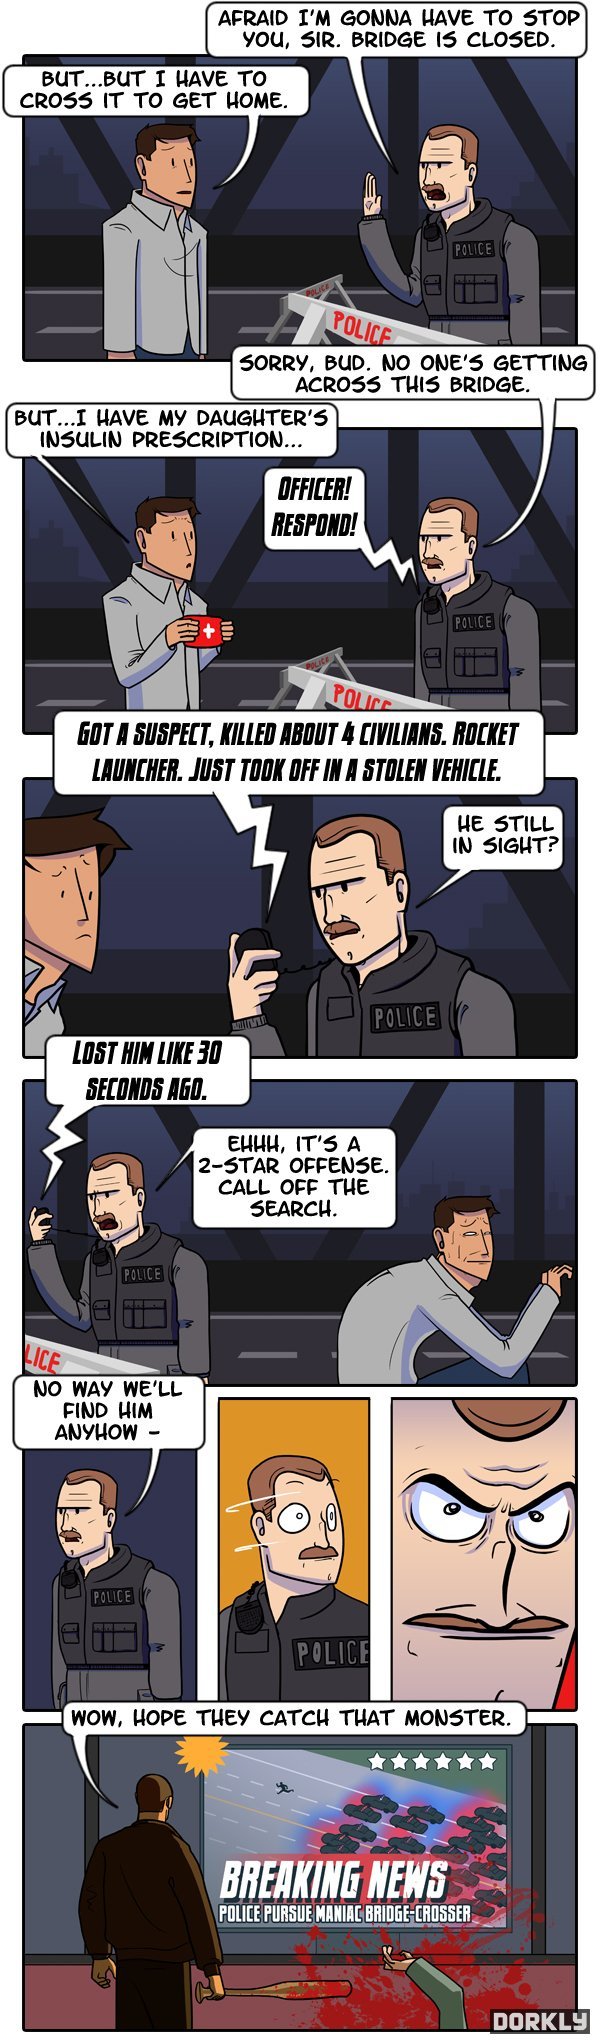 The worst crime in Liberty City. - meme